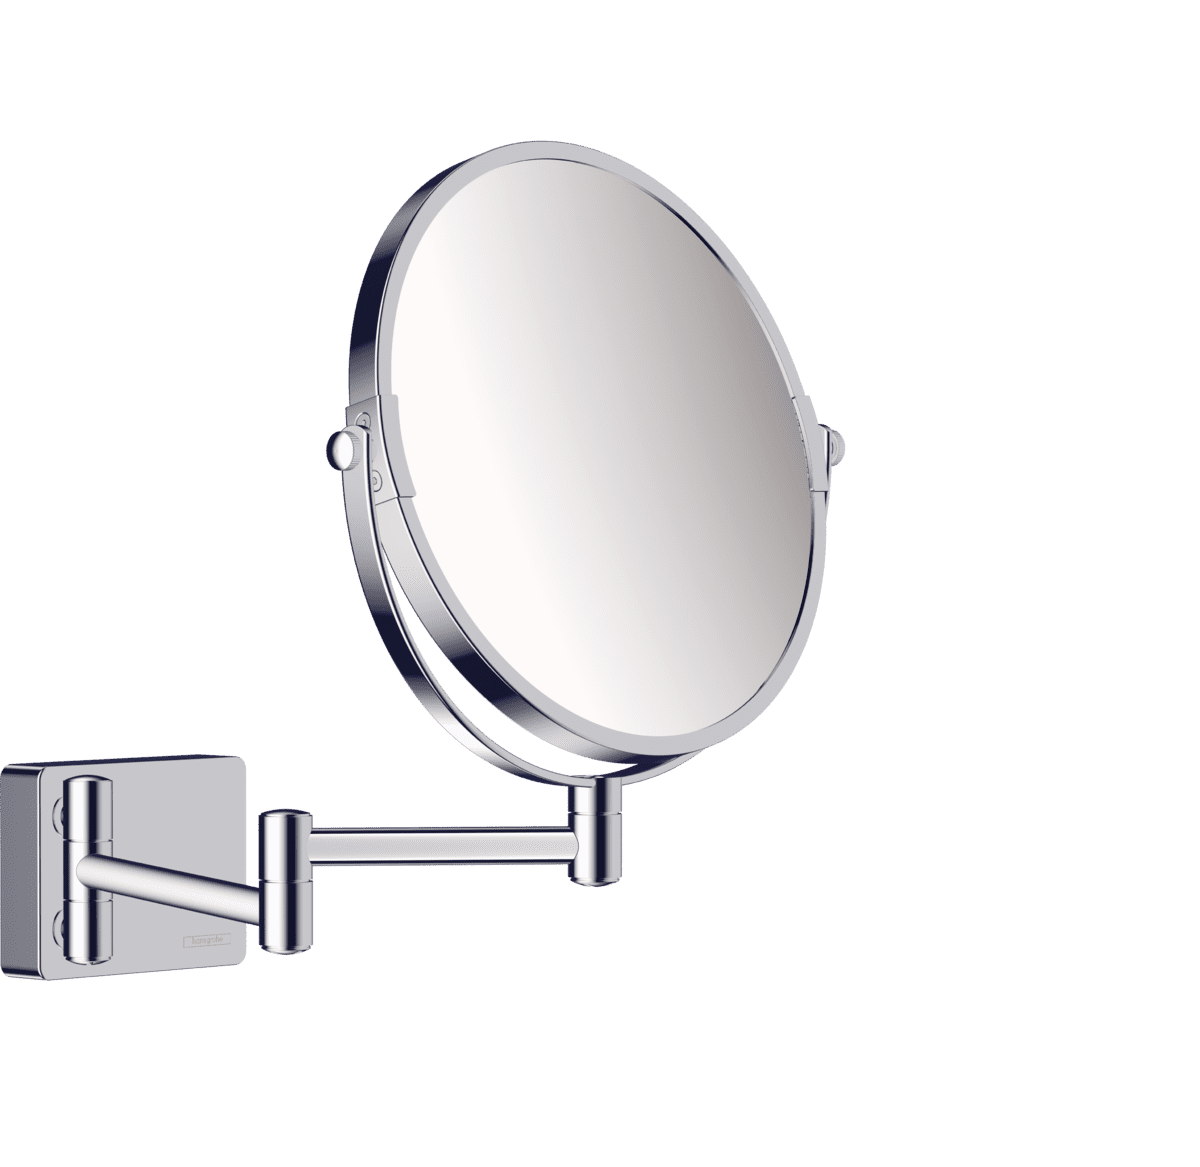 Picture of HANSGROHE AddStoris Shaving mirror #41791000 - Chrome